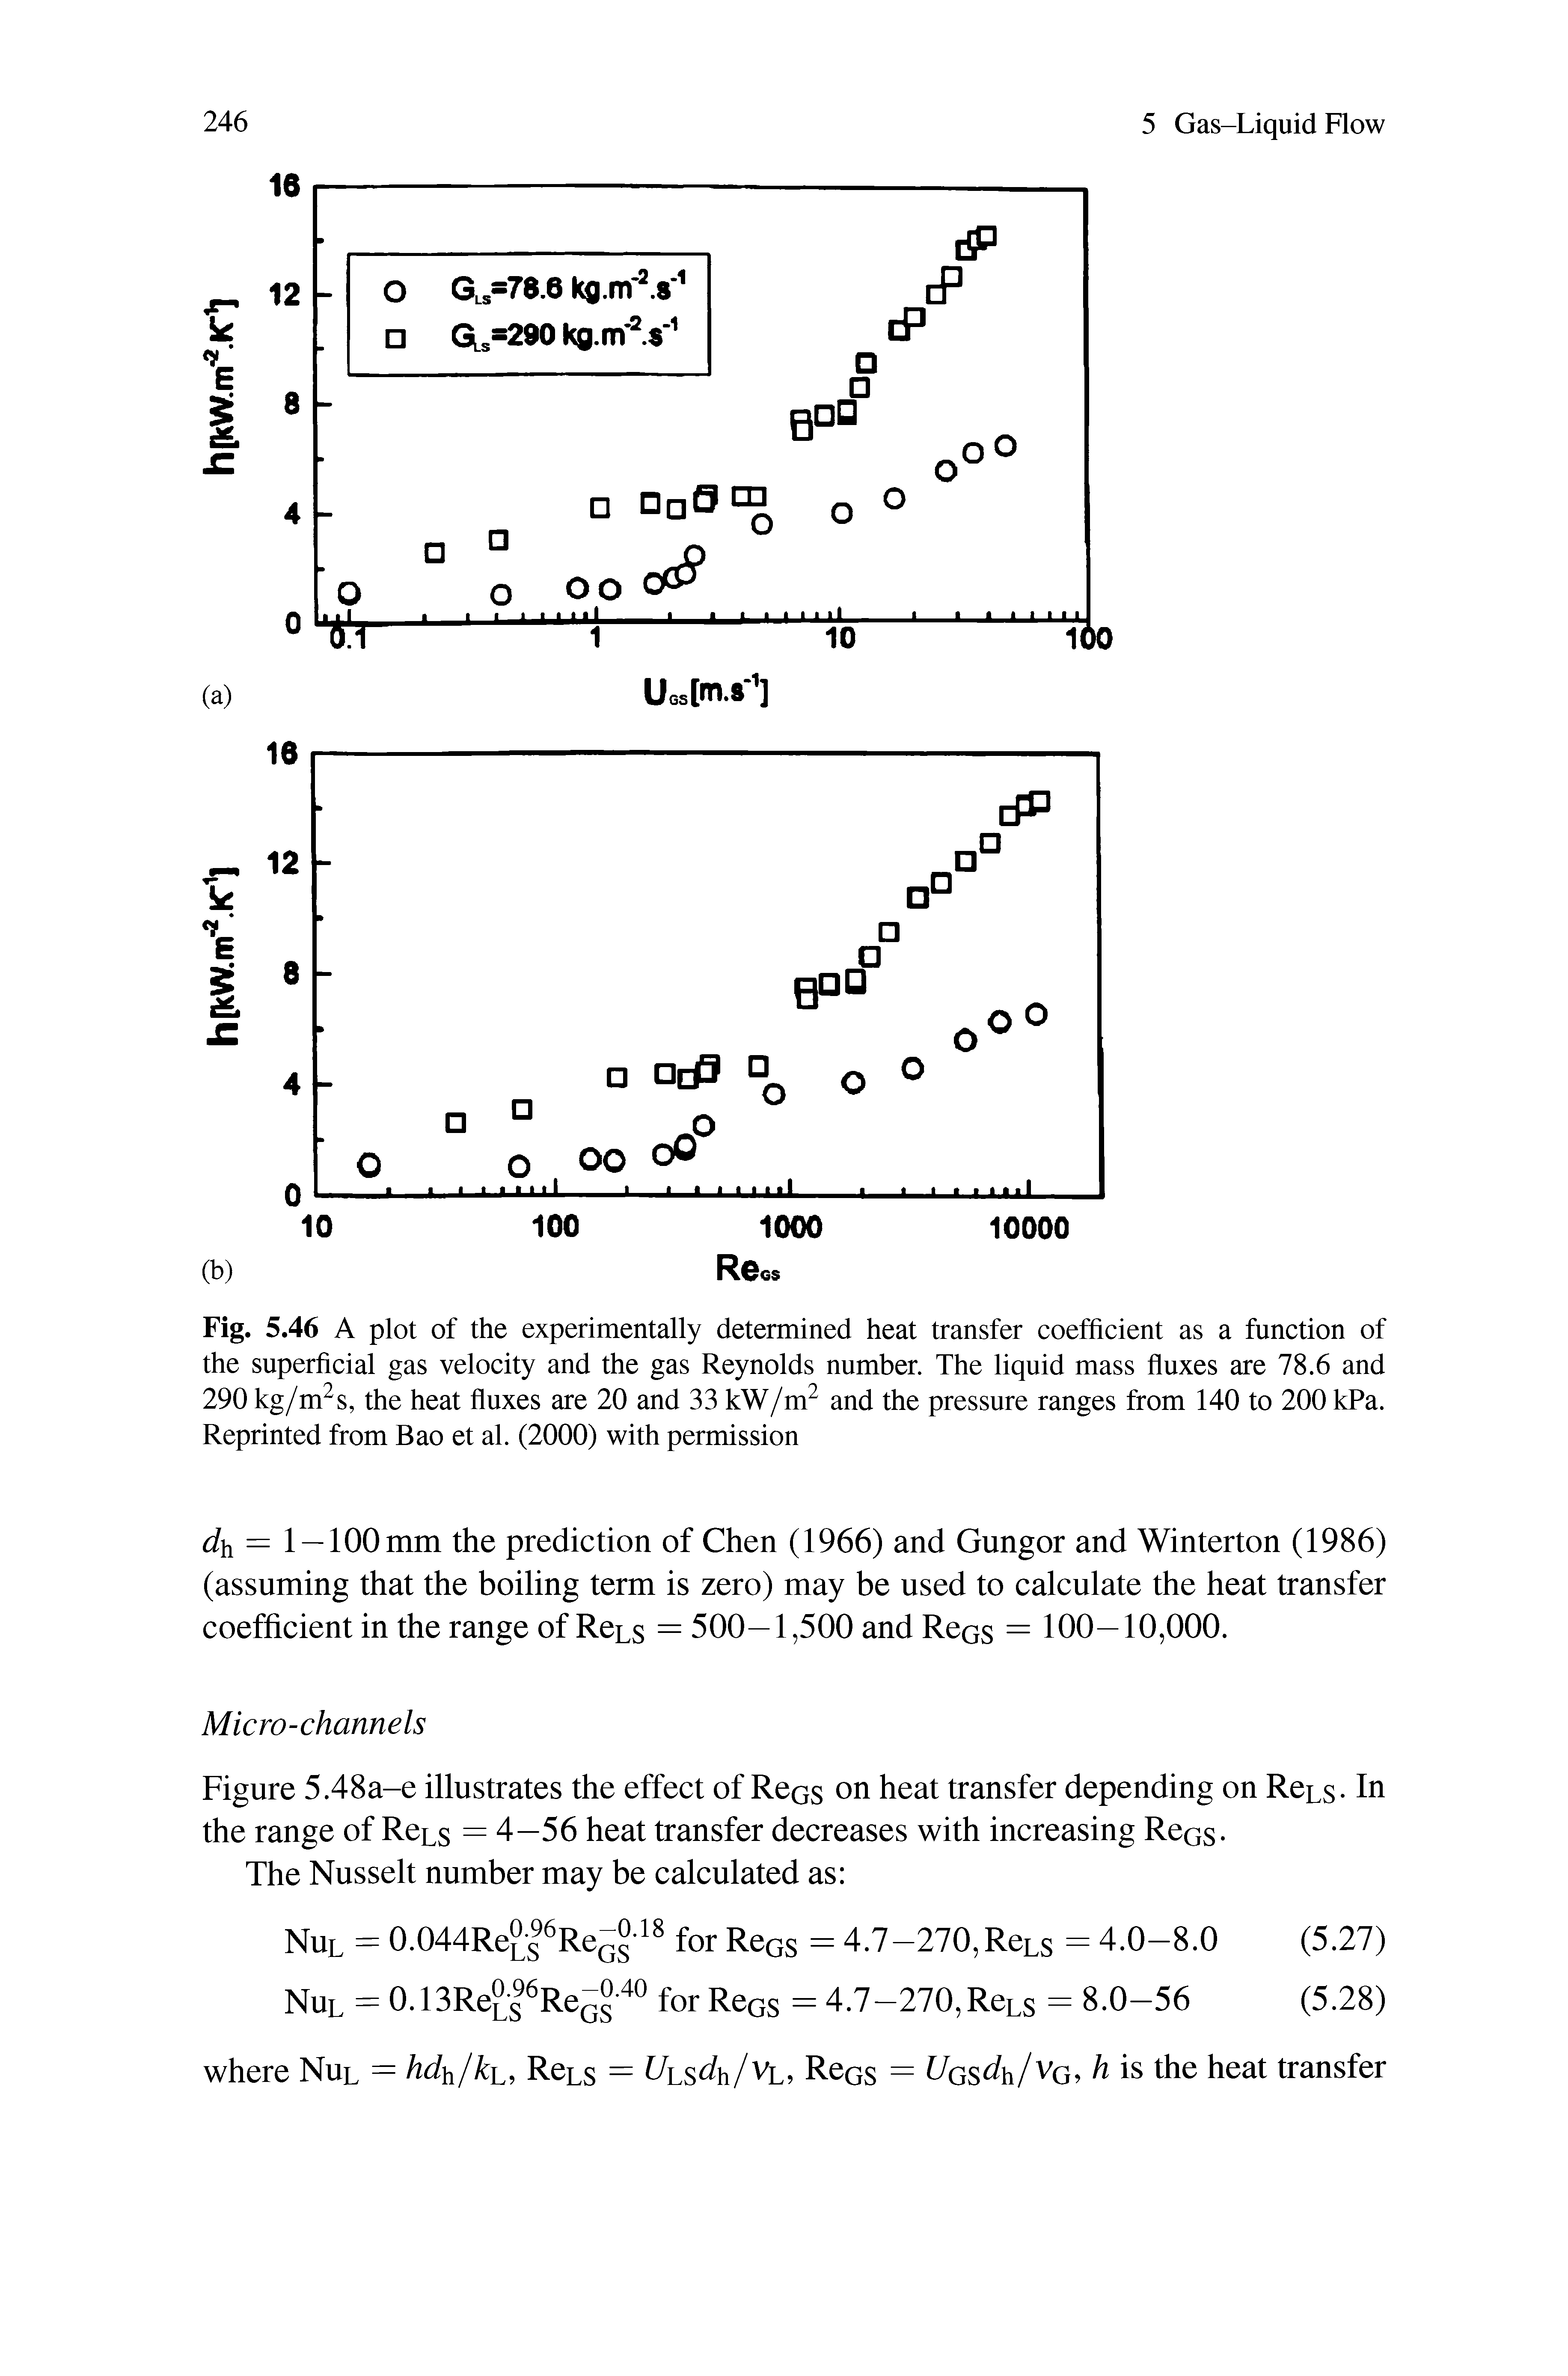 Fig. 5.46 A plot of the experimentally determined heat transfer coefficient as a function of the superficial gas velocity and the gas Reynolds number. The liquid mass fluxes are 78.6 and 290 kg/m s, the heat fluxes are 20 and 33 kW/m and the pressure ranges from 140 to 200 kPa. Reprinted from Bao et al. (2000) with permission...